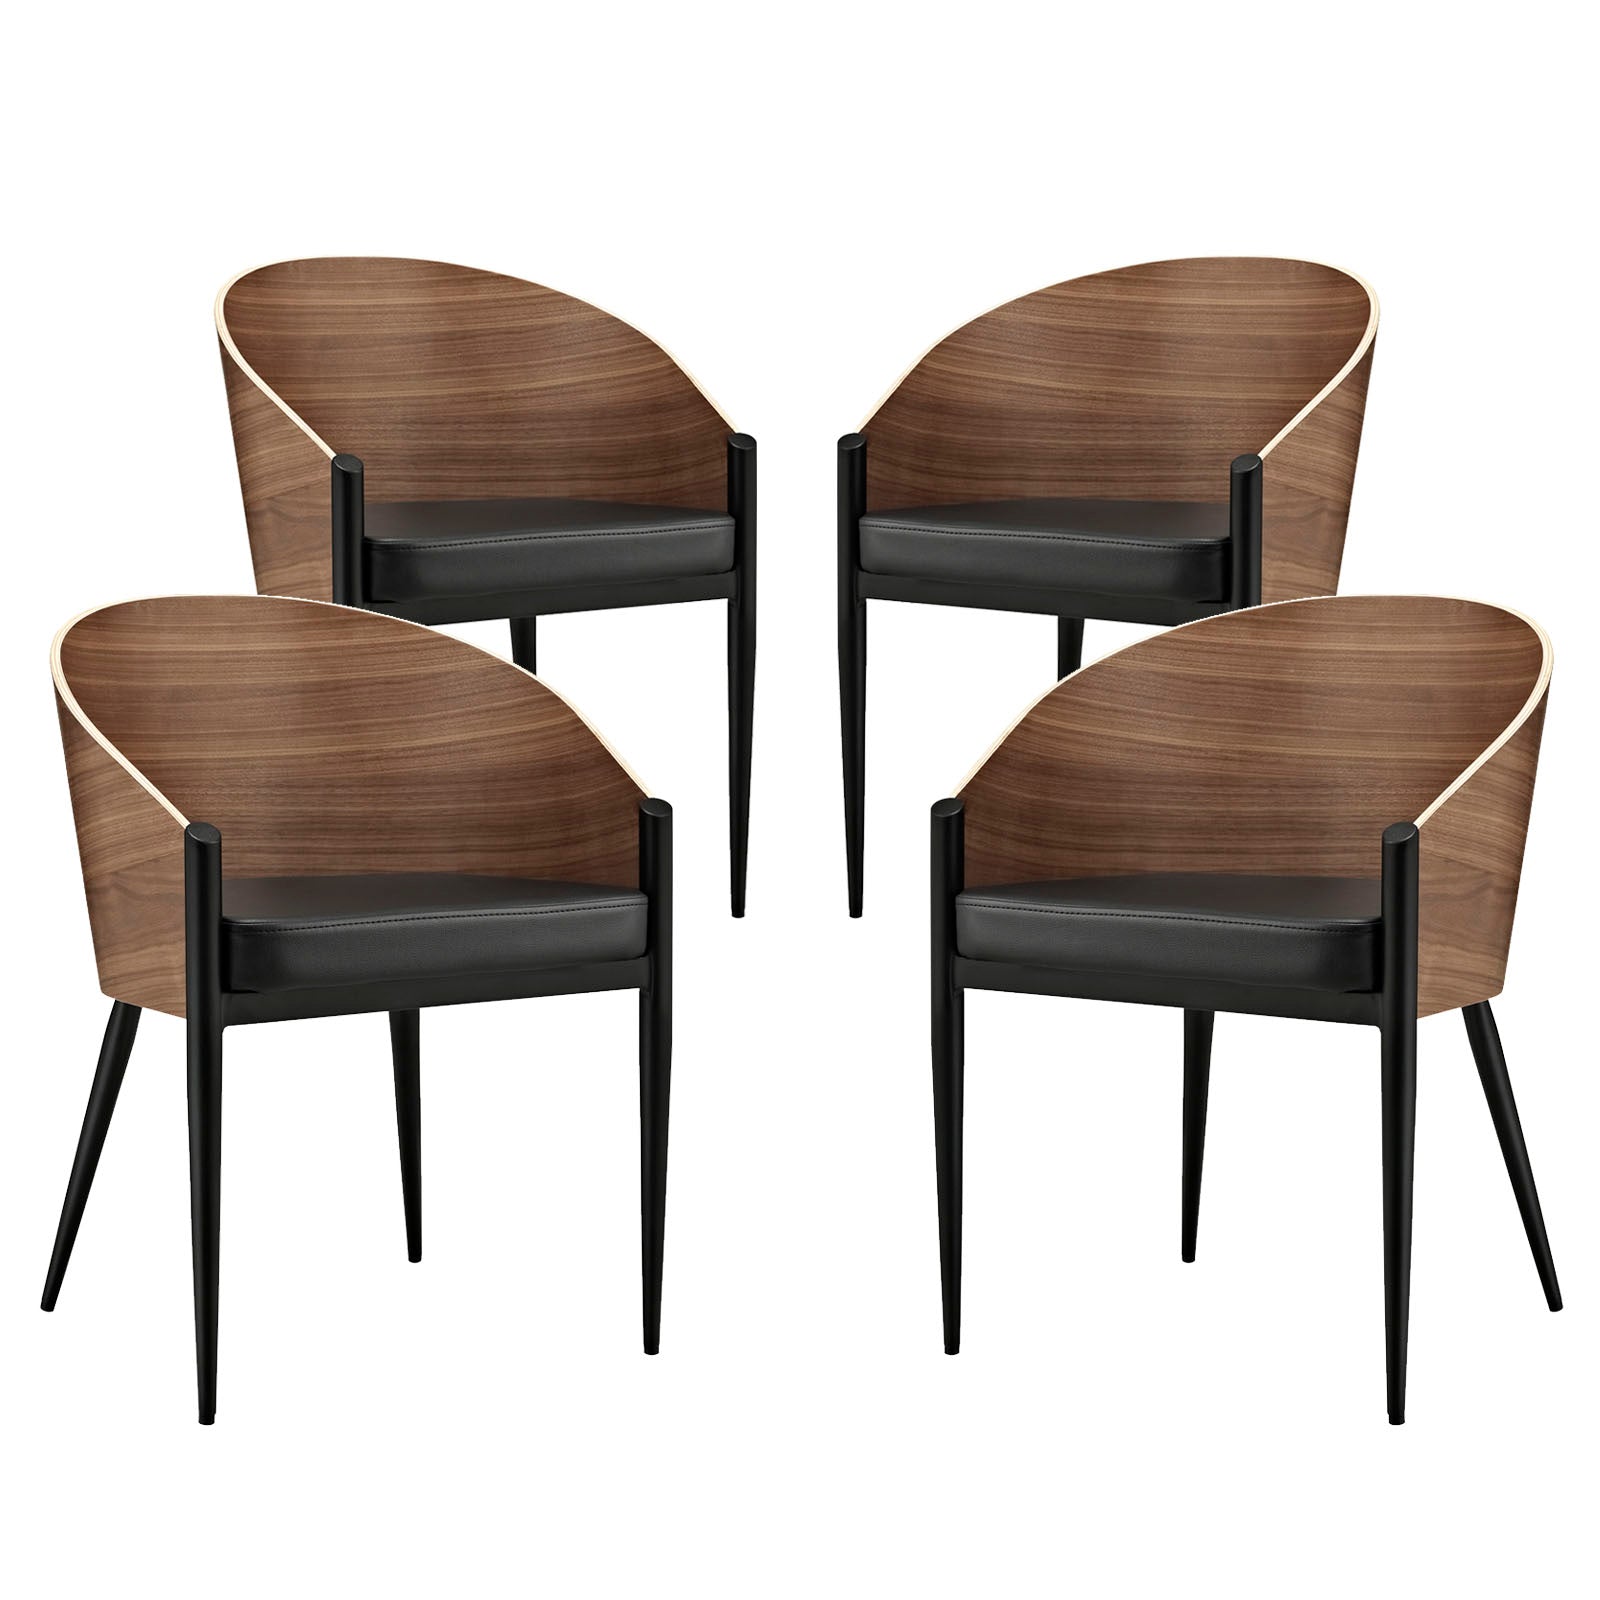 Modway Dining Chairs - Cooper Dining Chair Walnut (Set Of 4)